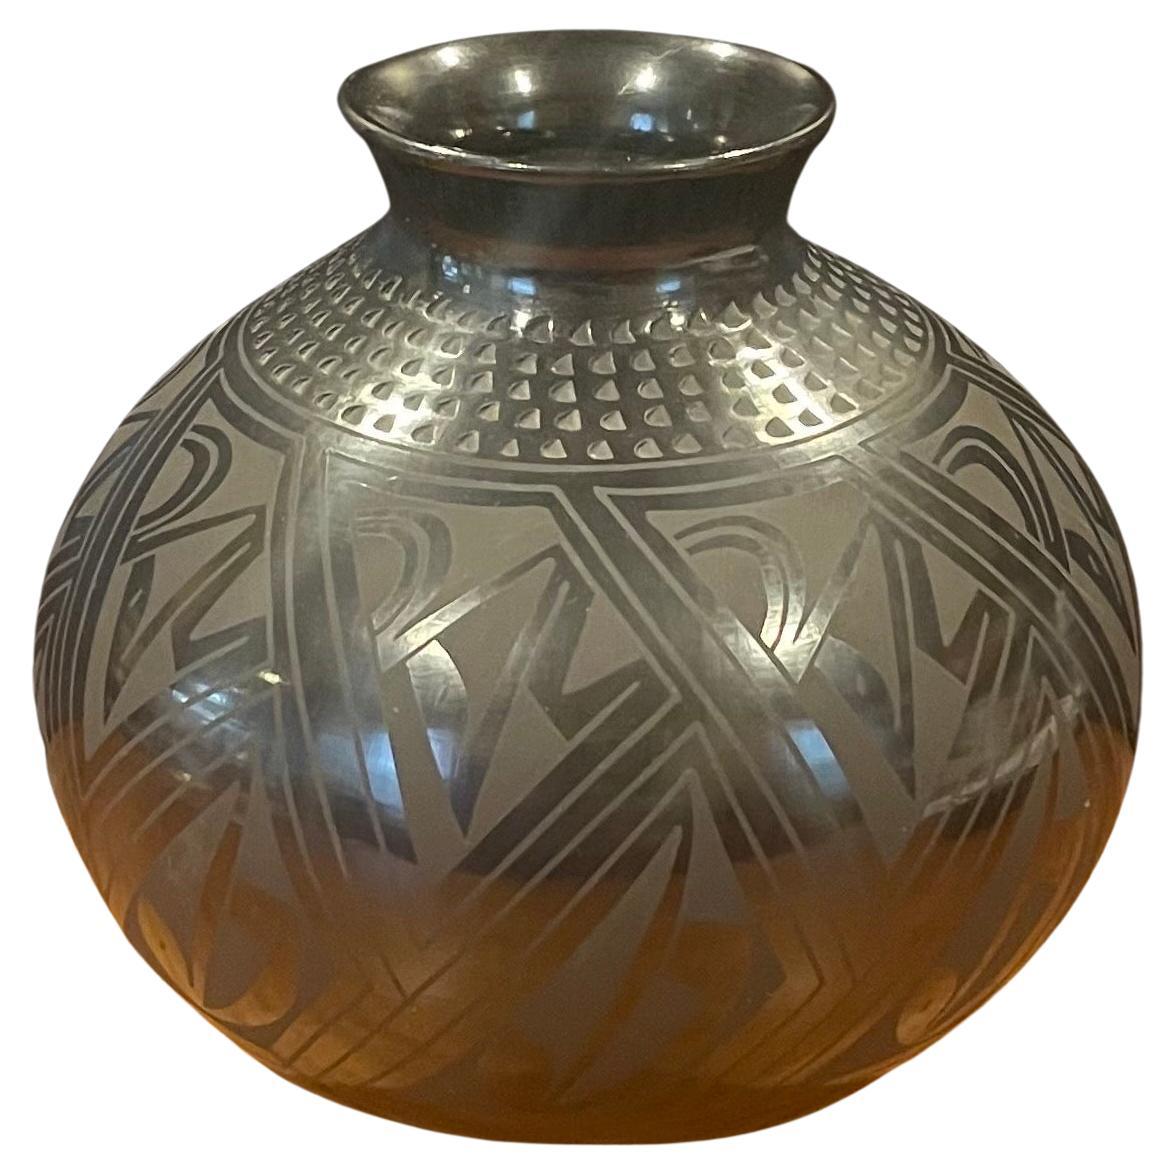 Beautiful hand-turned geometric blackware vase by Tomaso Mora, circa 1990s. The exquisite piece made of naturally black clay has a unique geometric design. This vase is in very good condition and measures 6